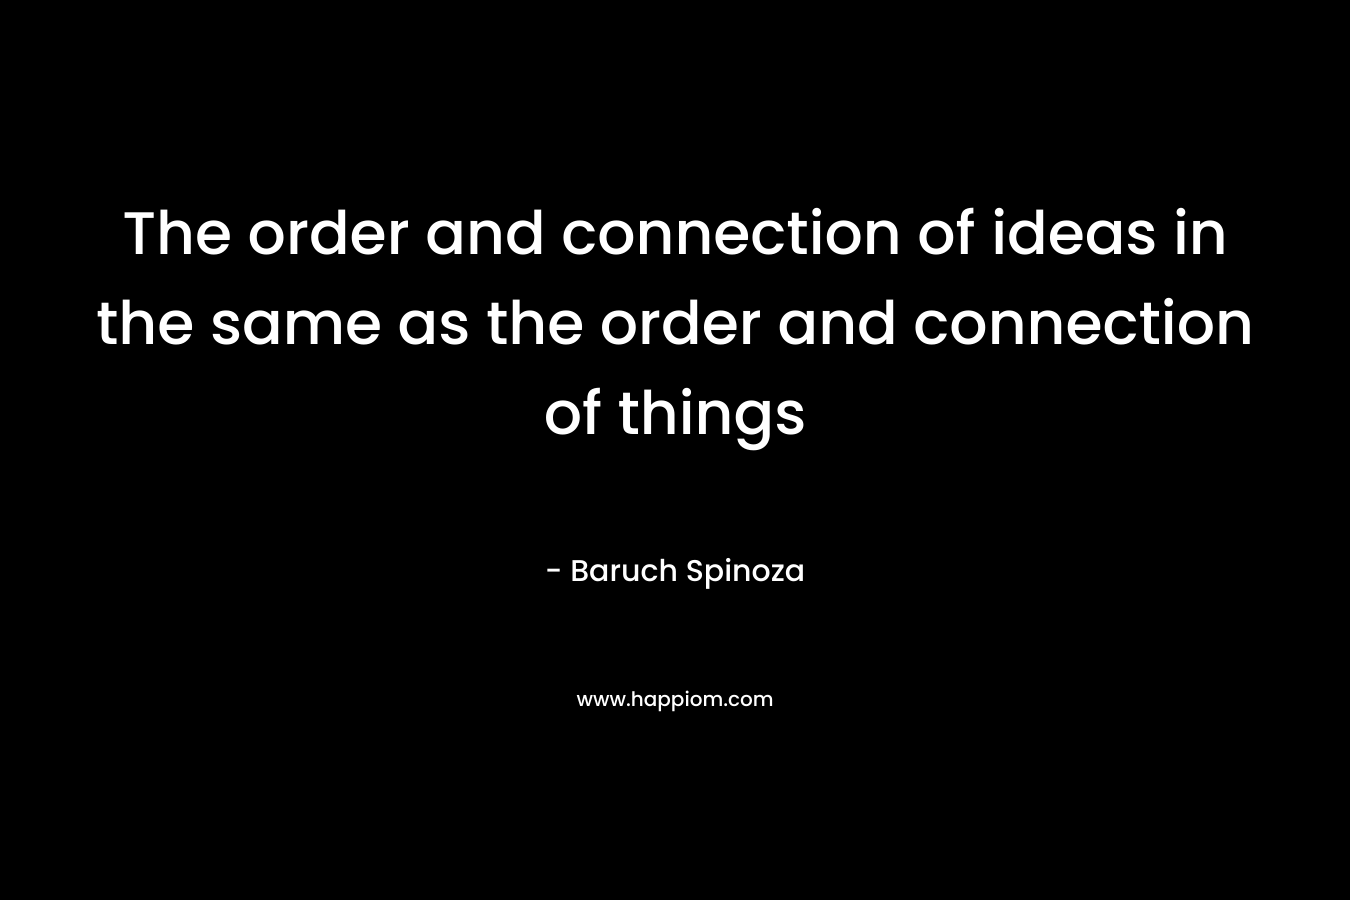 The order and connection of ideas in the same as the order and connection of things